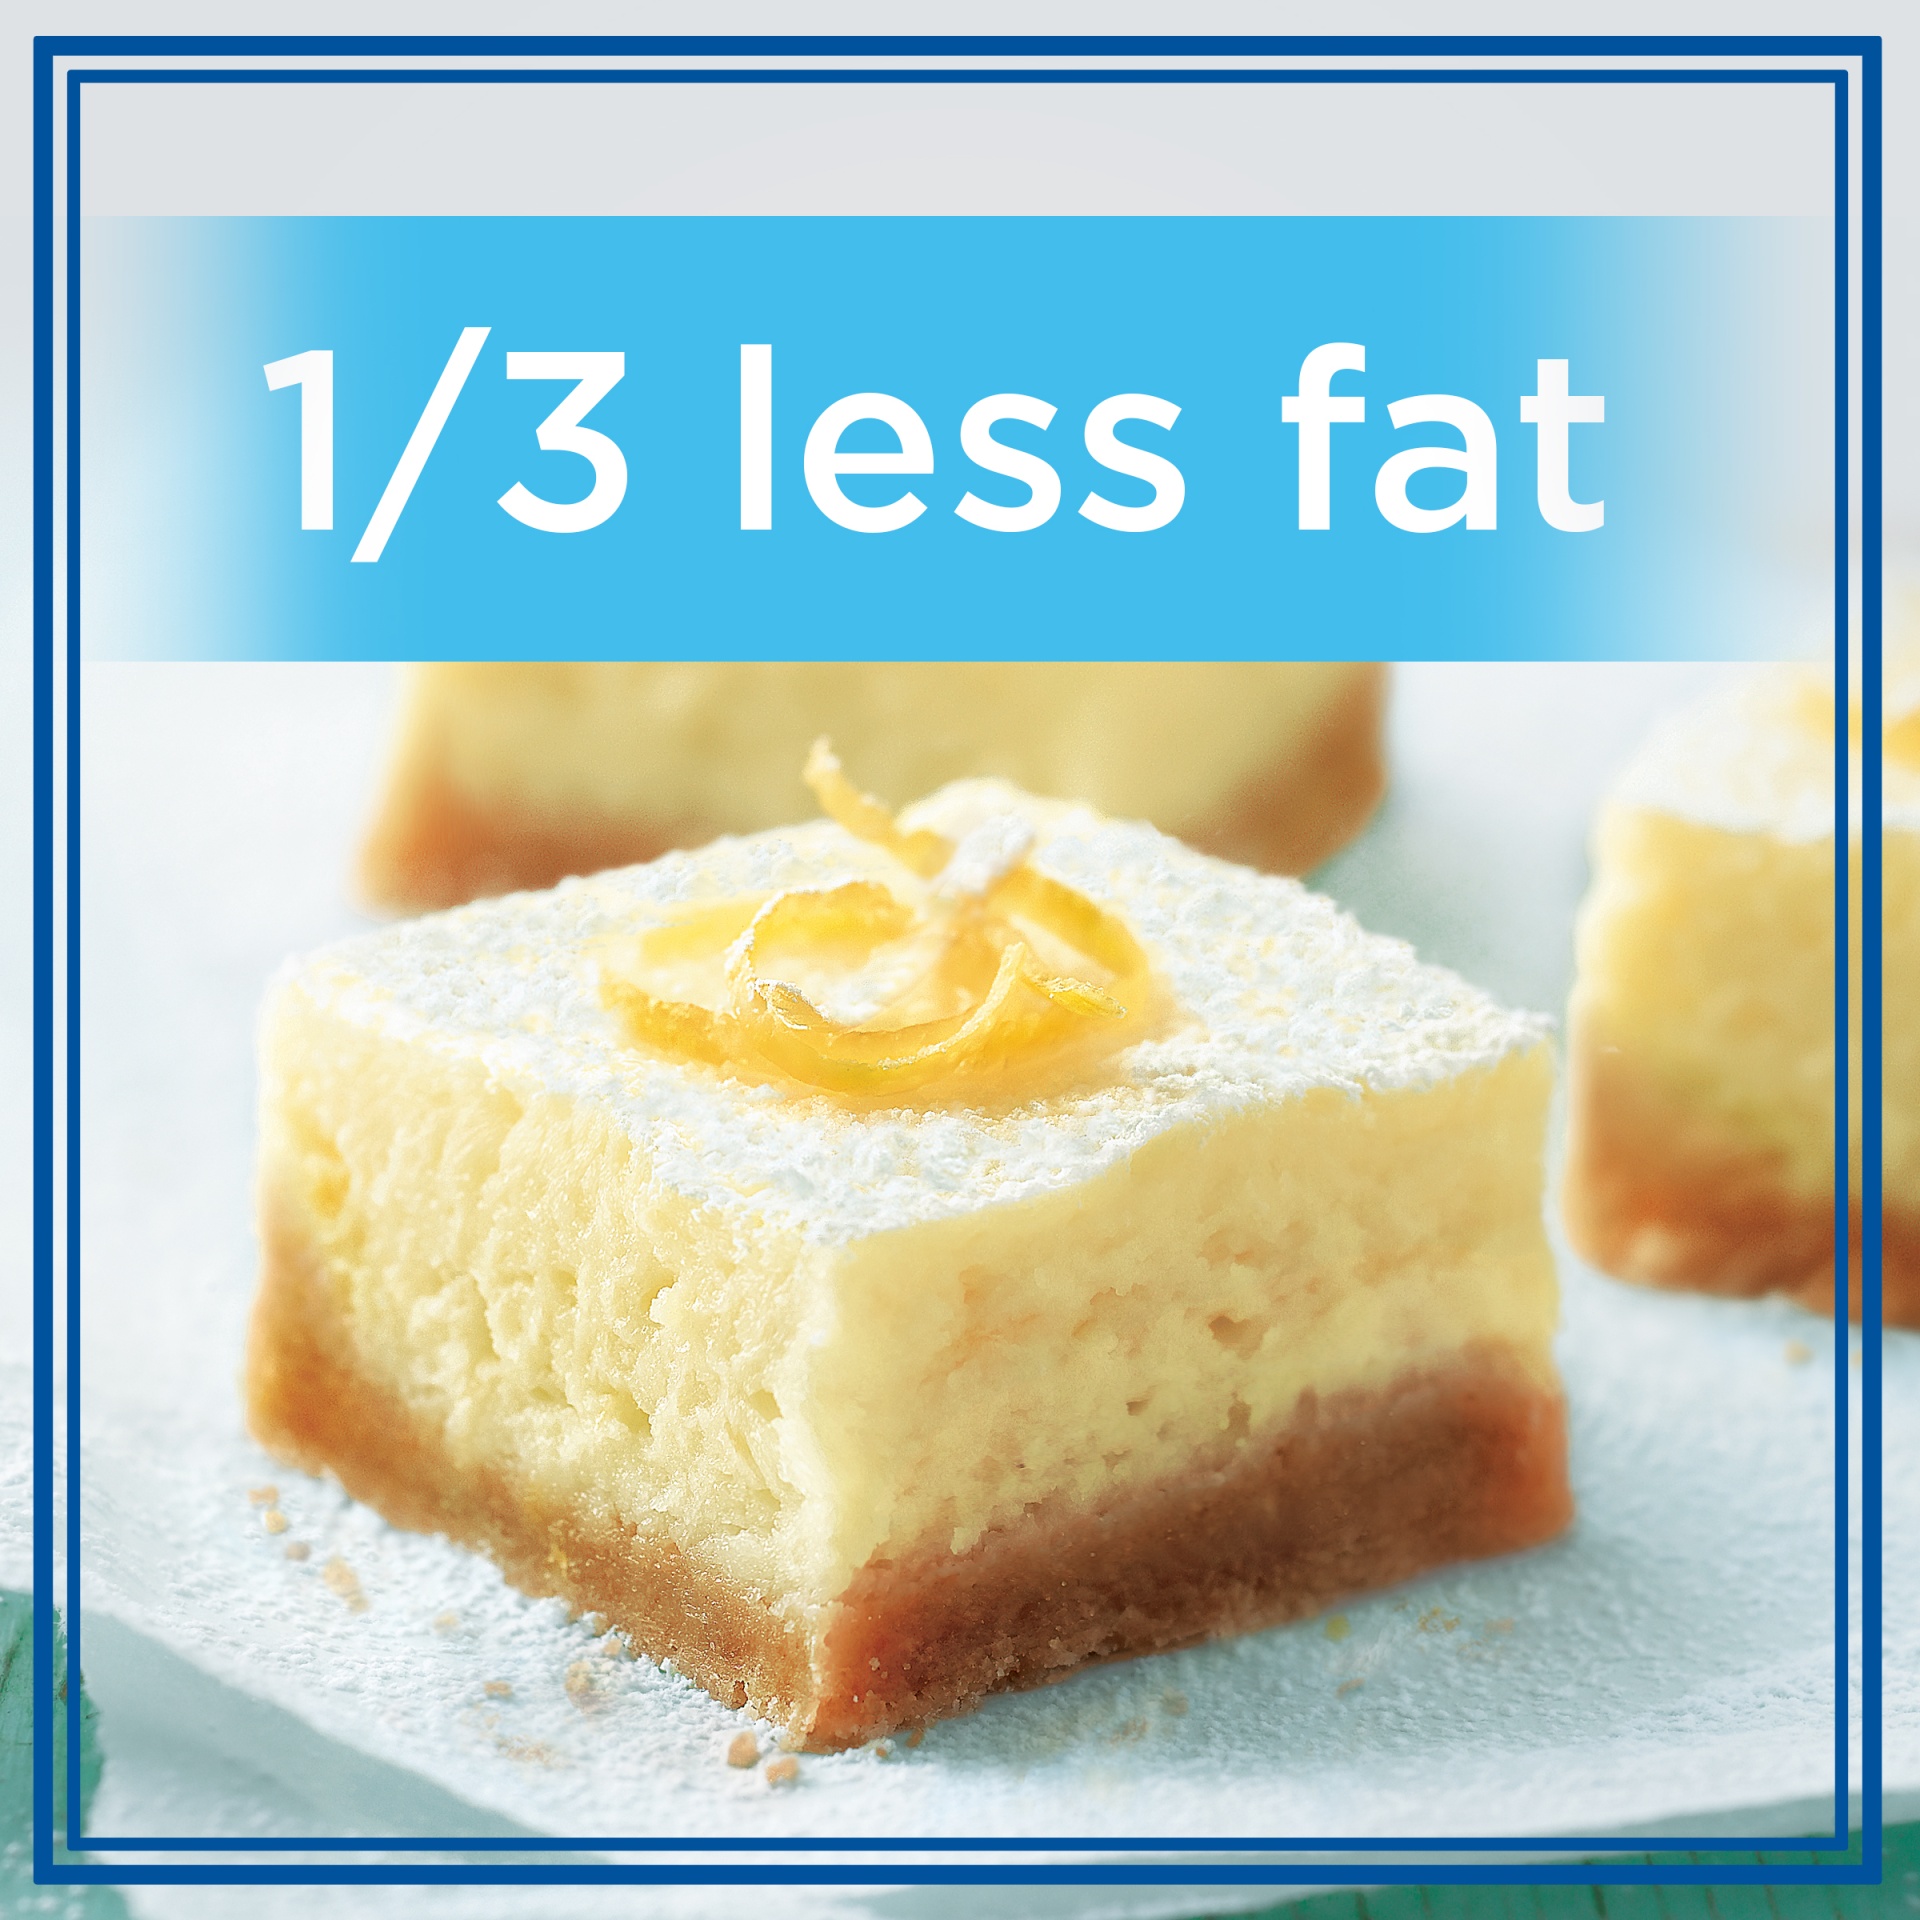 slide 7 of 13, Philadelphia Reduced Fat Cream Cheese Spread with 1/3 Less Fat Tub, 16 oz